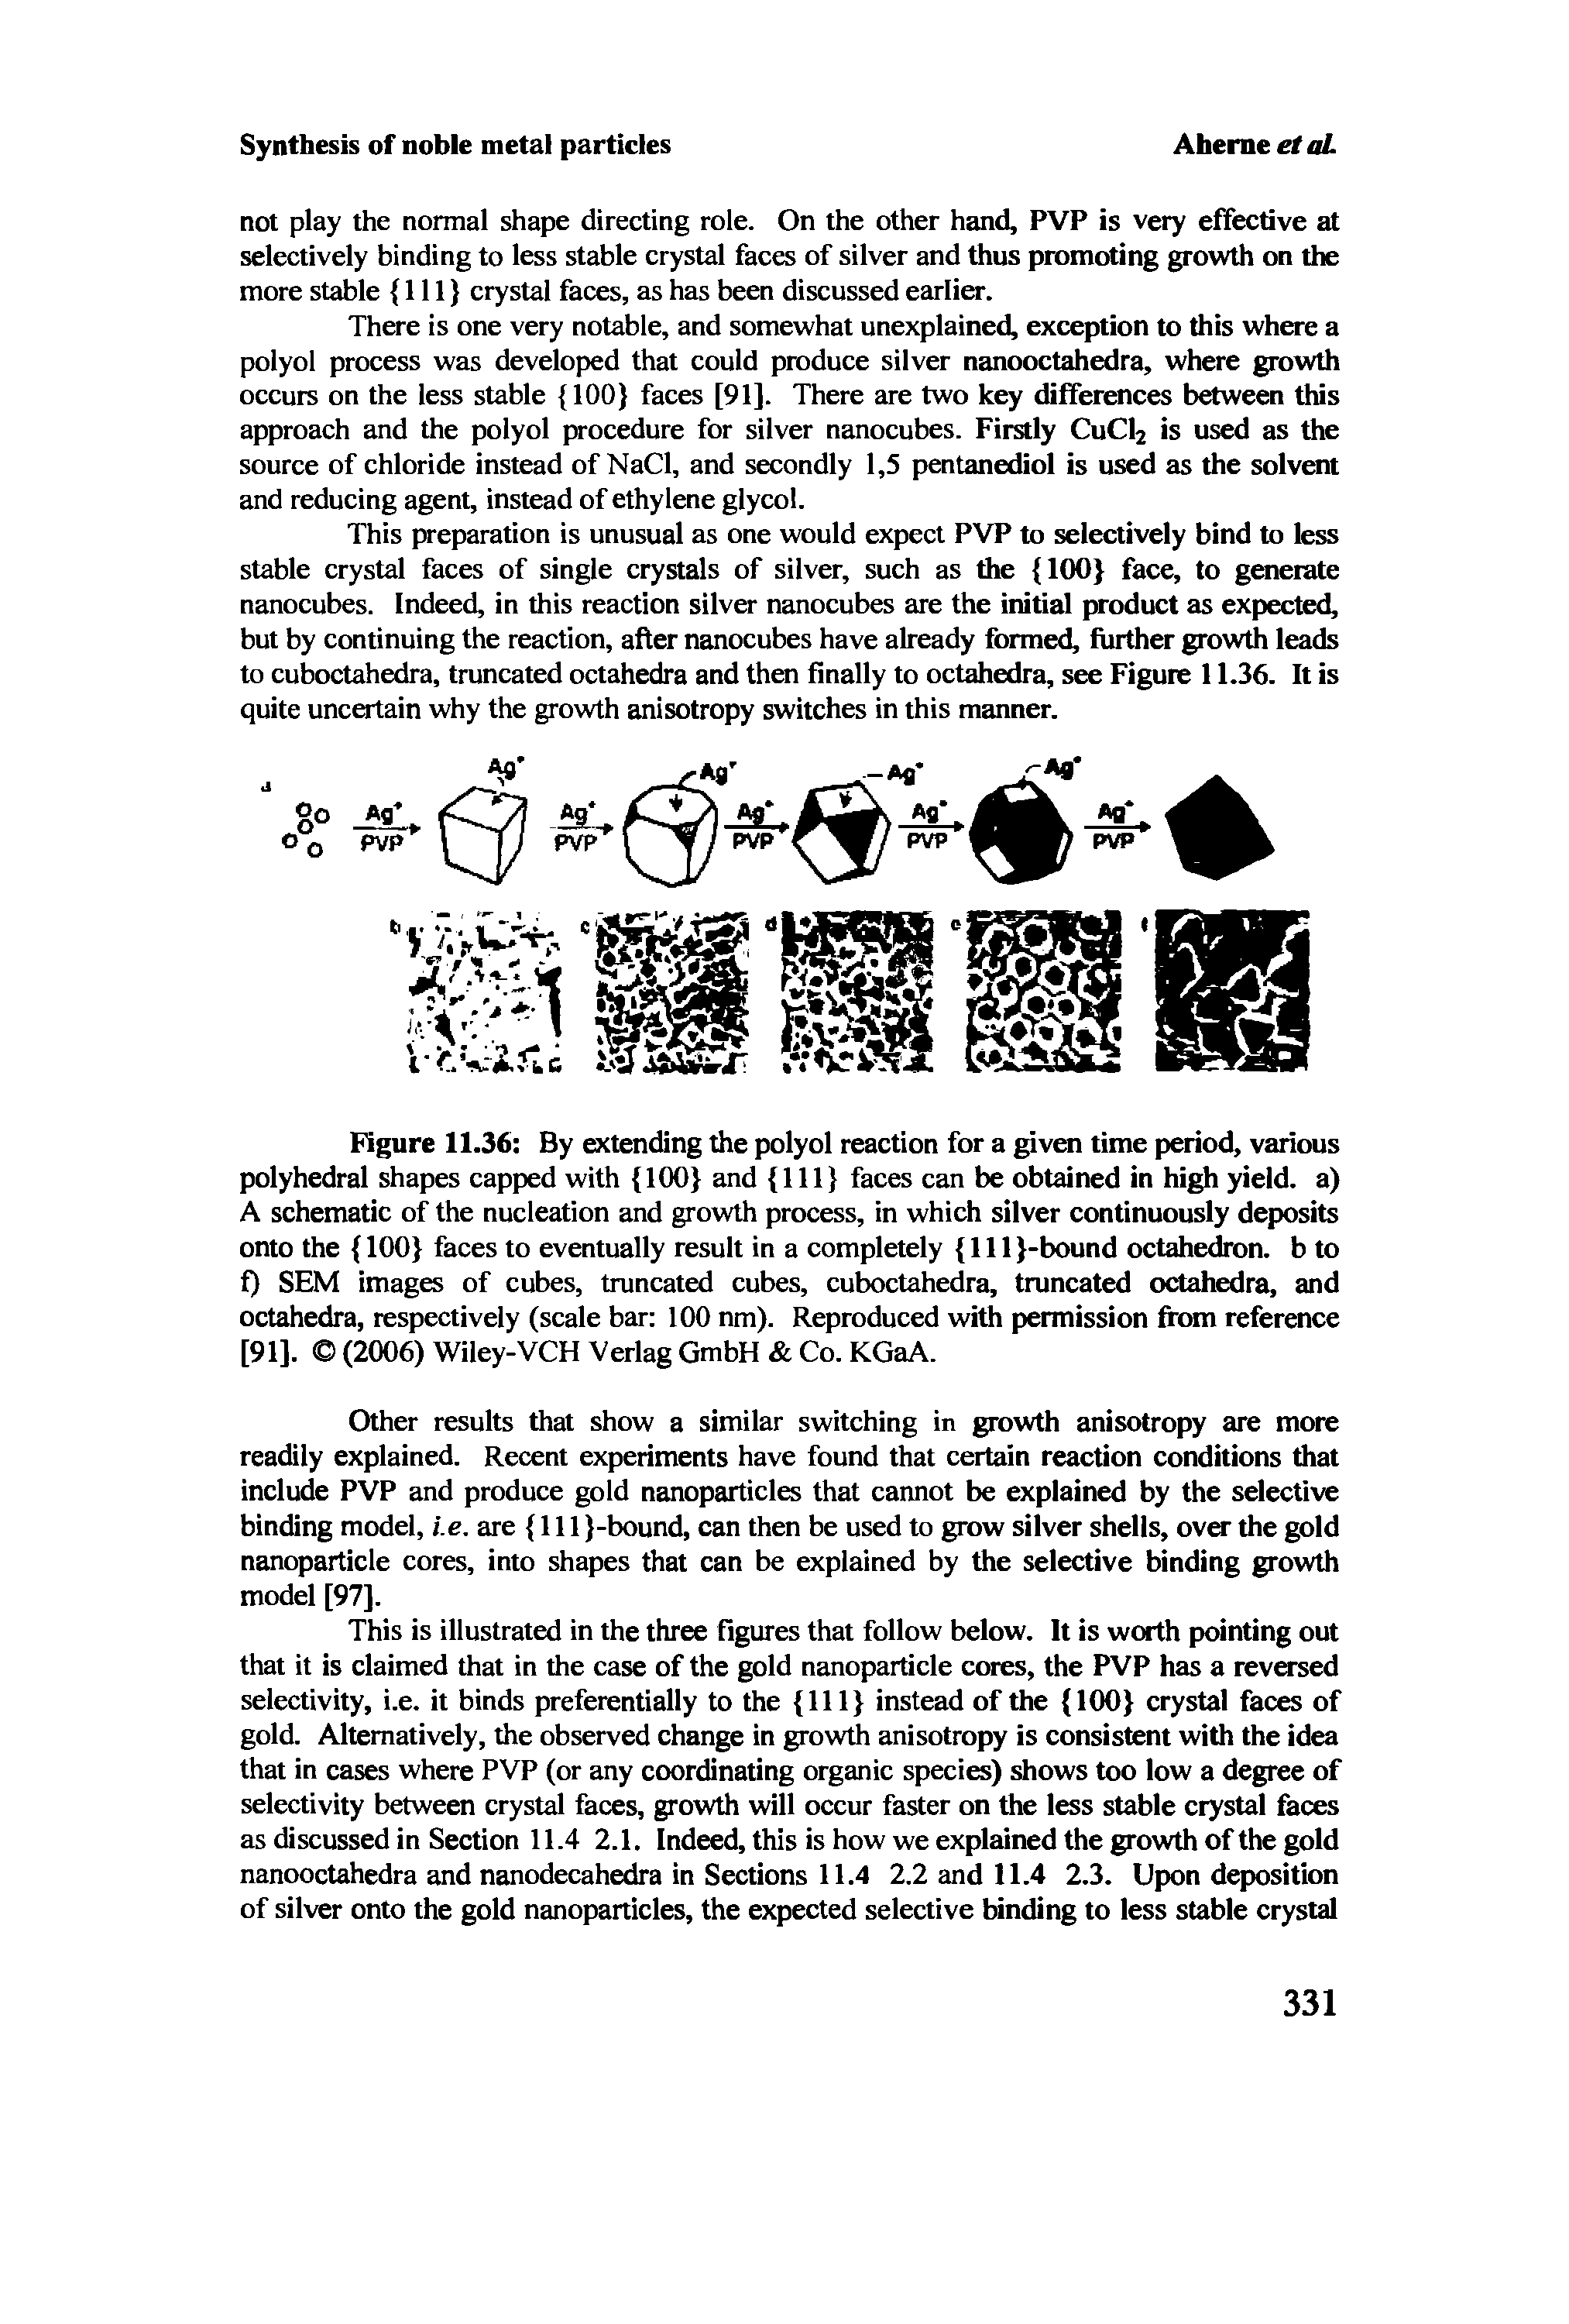 Figure 11.36 By extending the polyol reaction for a ven time period, various polyhedral shapes capped with 100 and 111 faces can be obtained in high yield, a) A schematic of the nucleation and growth process, in which silver continuously deposits onto the 100 faces to eventually result in a completely 111 -bound octahedron, b to f) SEM images of cubes, truncated cubes, cuboctahedra, truncated octahedra, and octahedra, respectively (scale bar 100 nm). Reproduced with permission from reference [91]. (2006) Wiley-VCH Verlag GmbH Co. KGaA.